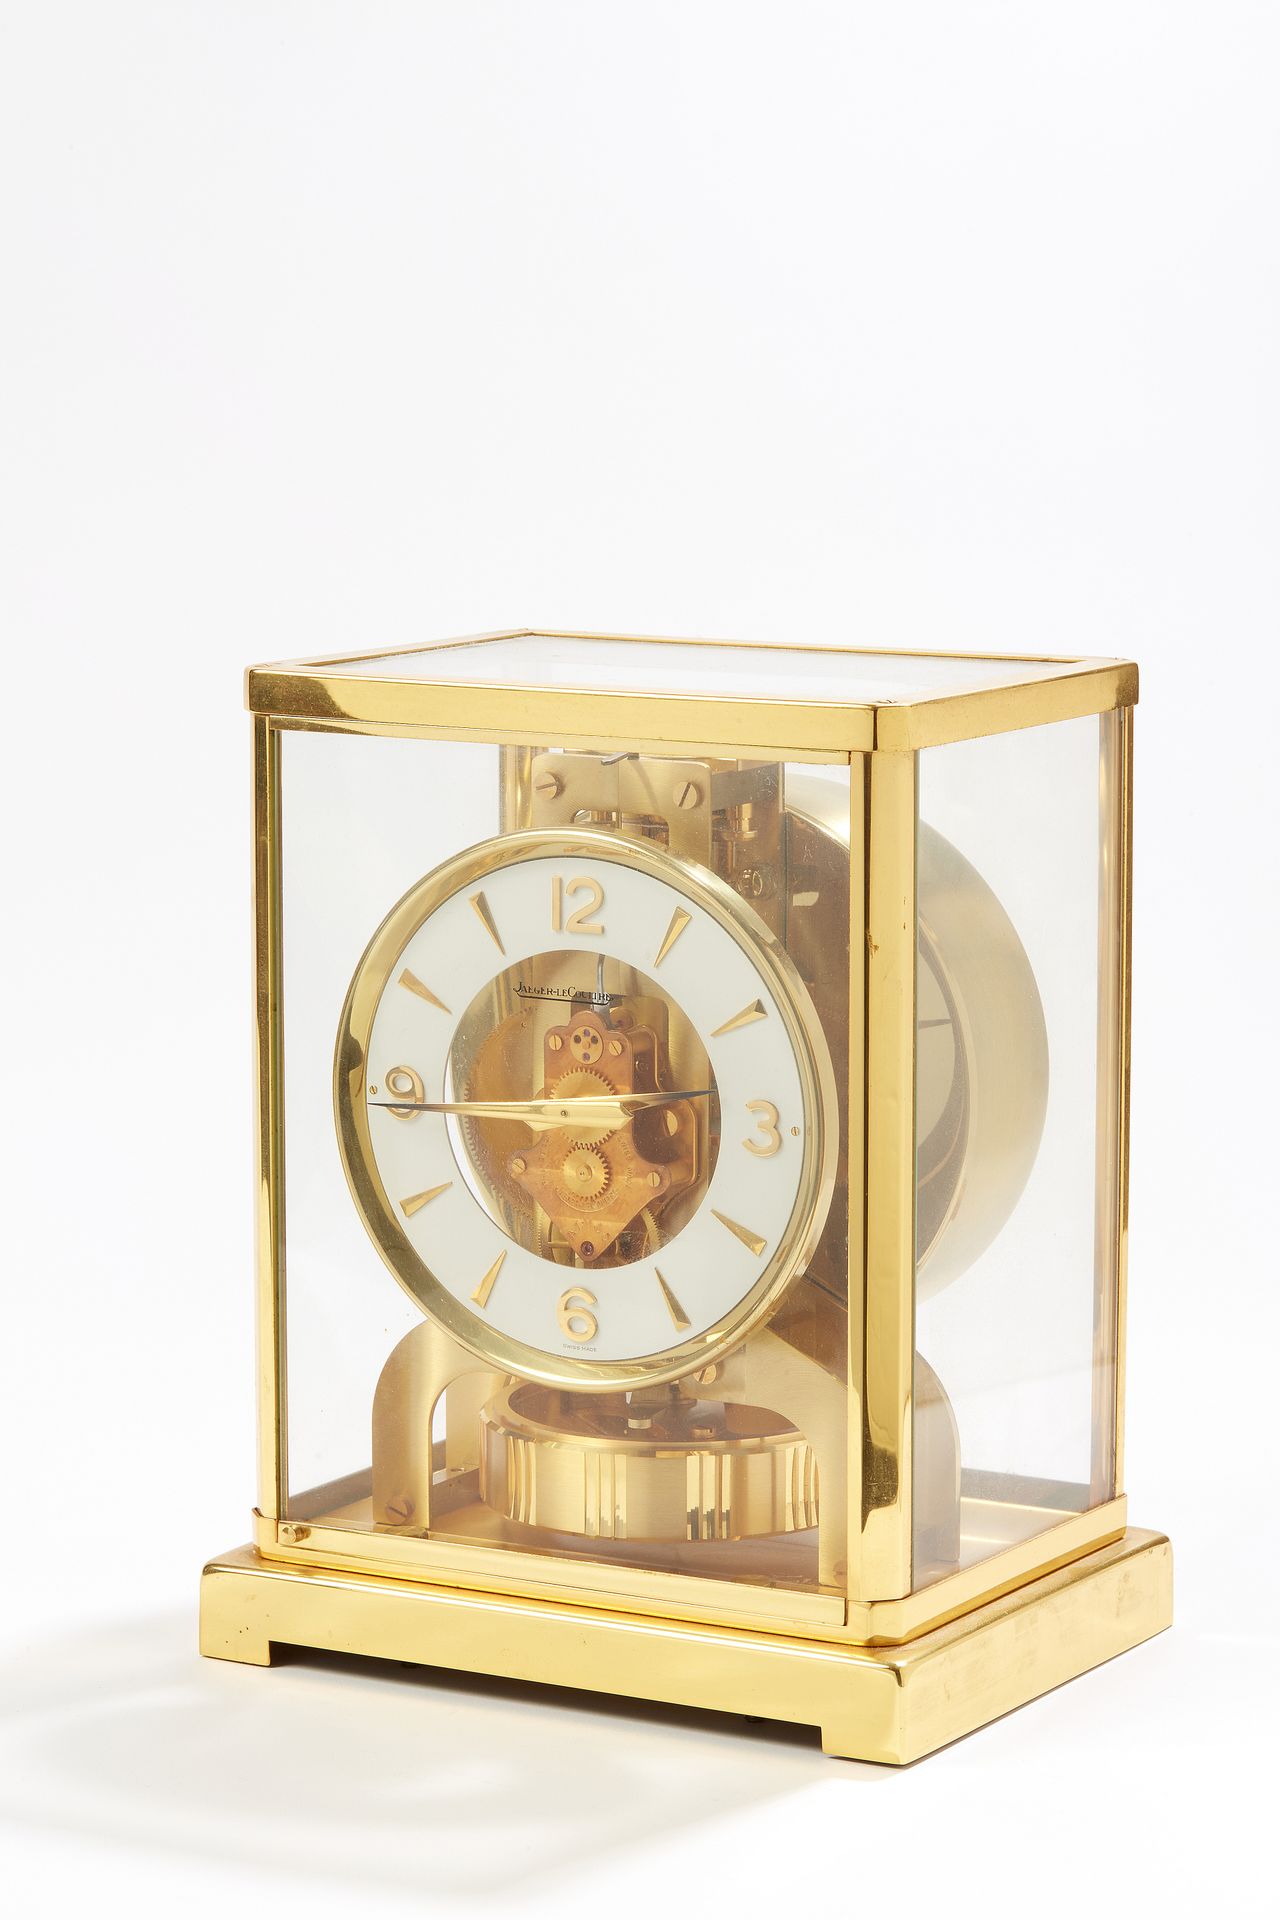 Null JAEGER LECOULTRE
ATMOS model clock, rectangular cage in gilded metal and gl&hellip;